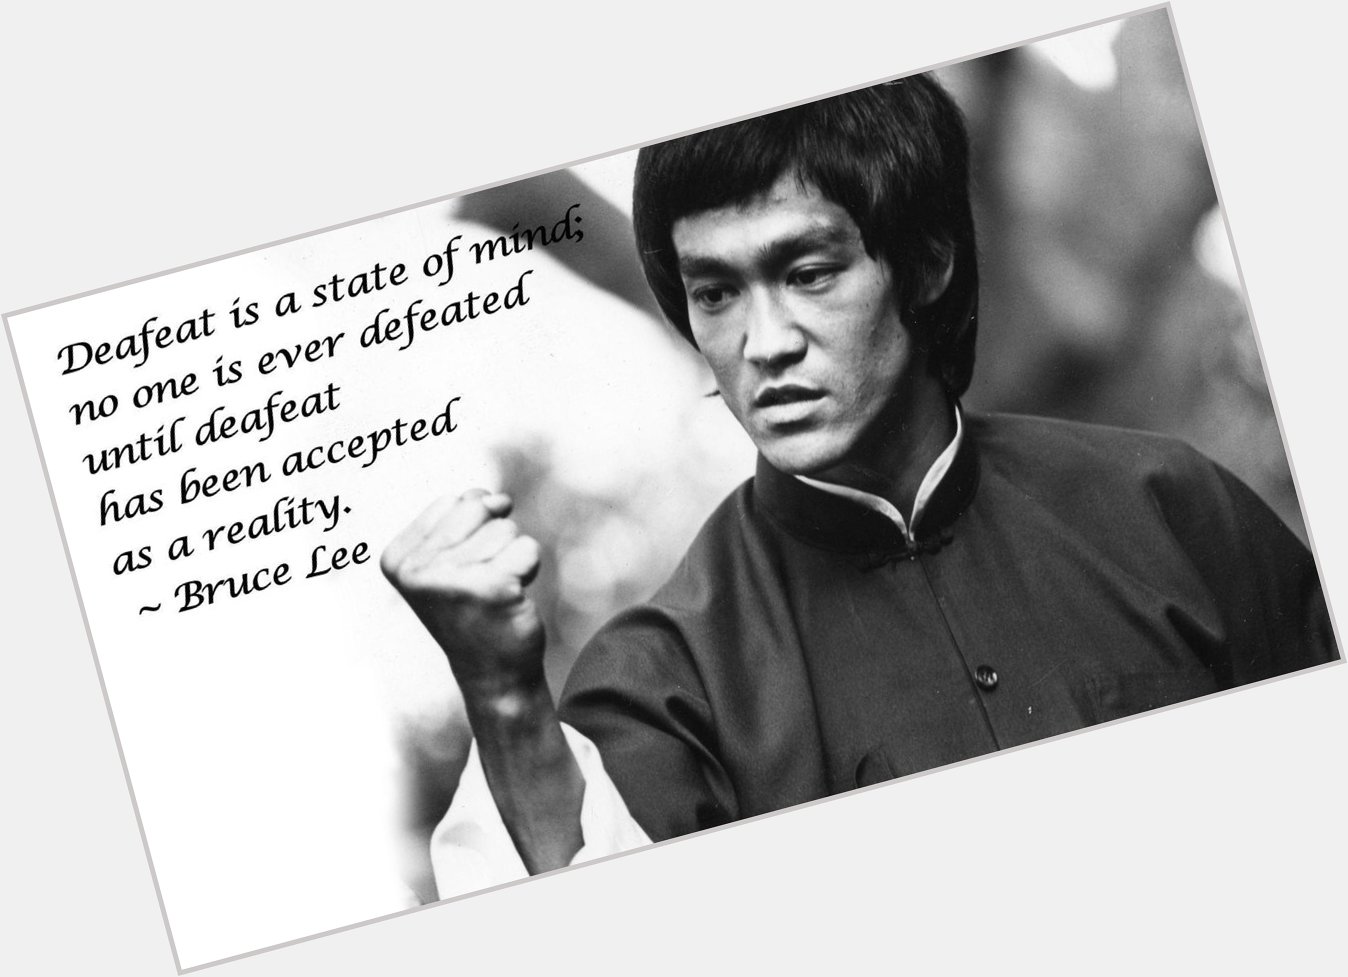 Happy Thanksgiving. & more importantly Happy Birthday to Bruce Lee. He would have been 74 years old today. 